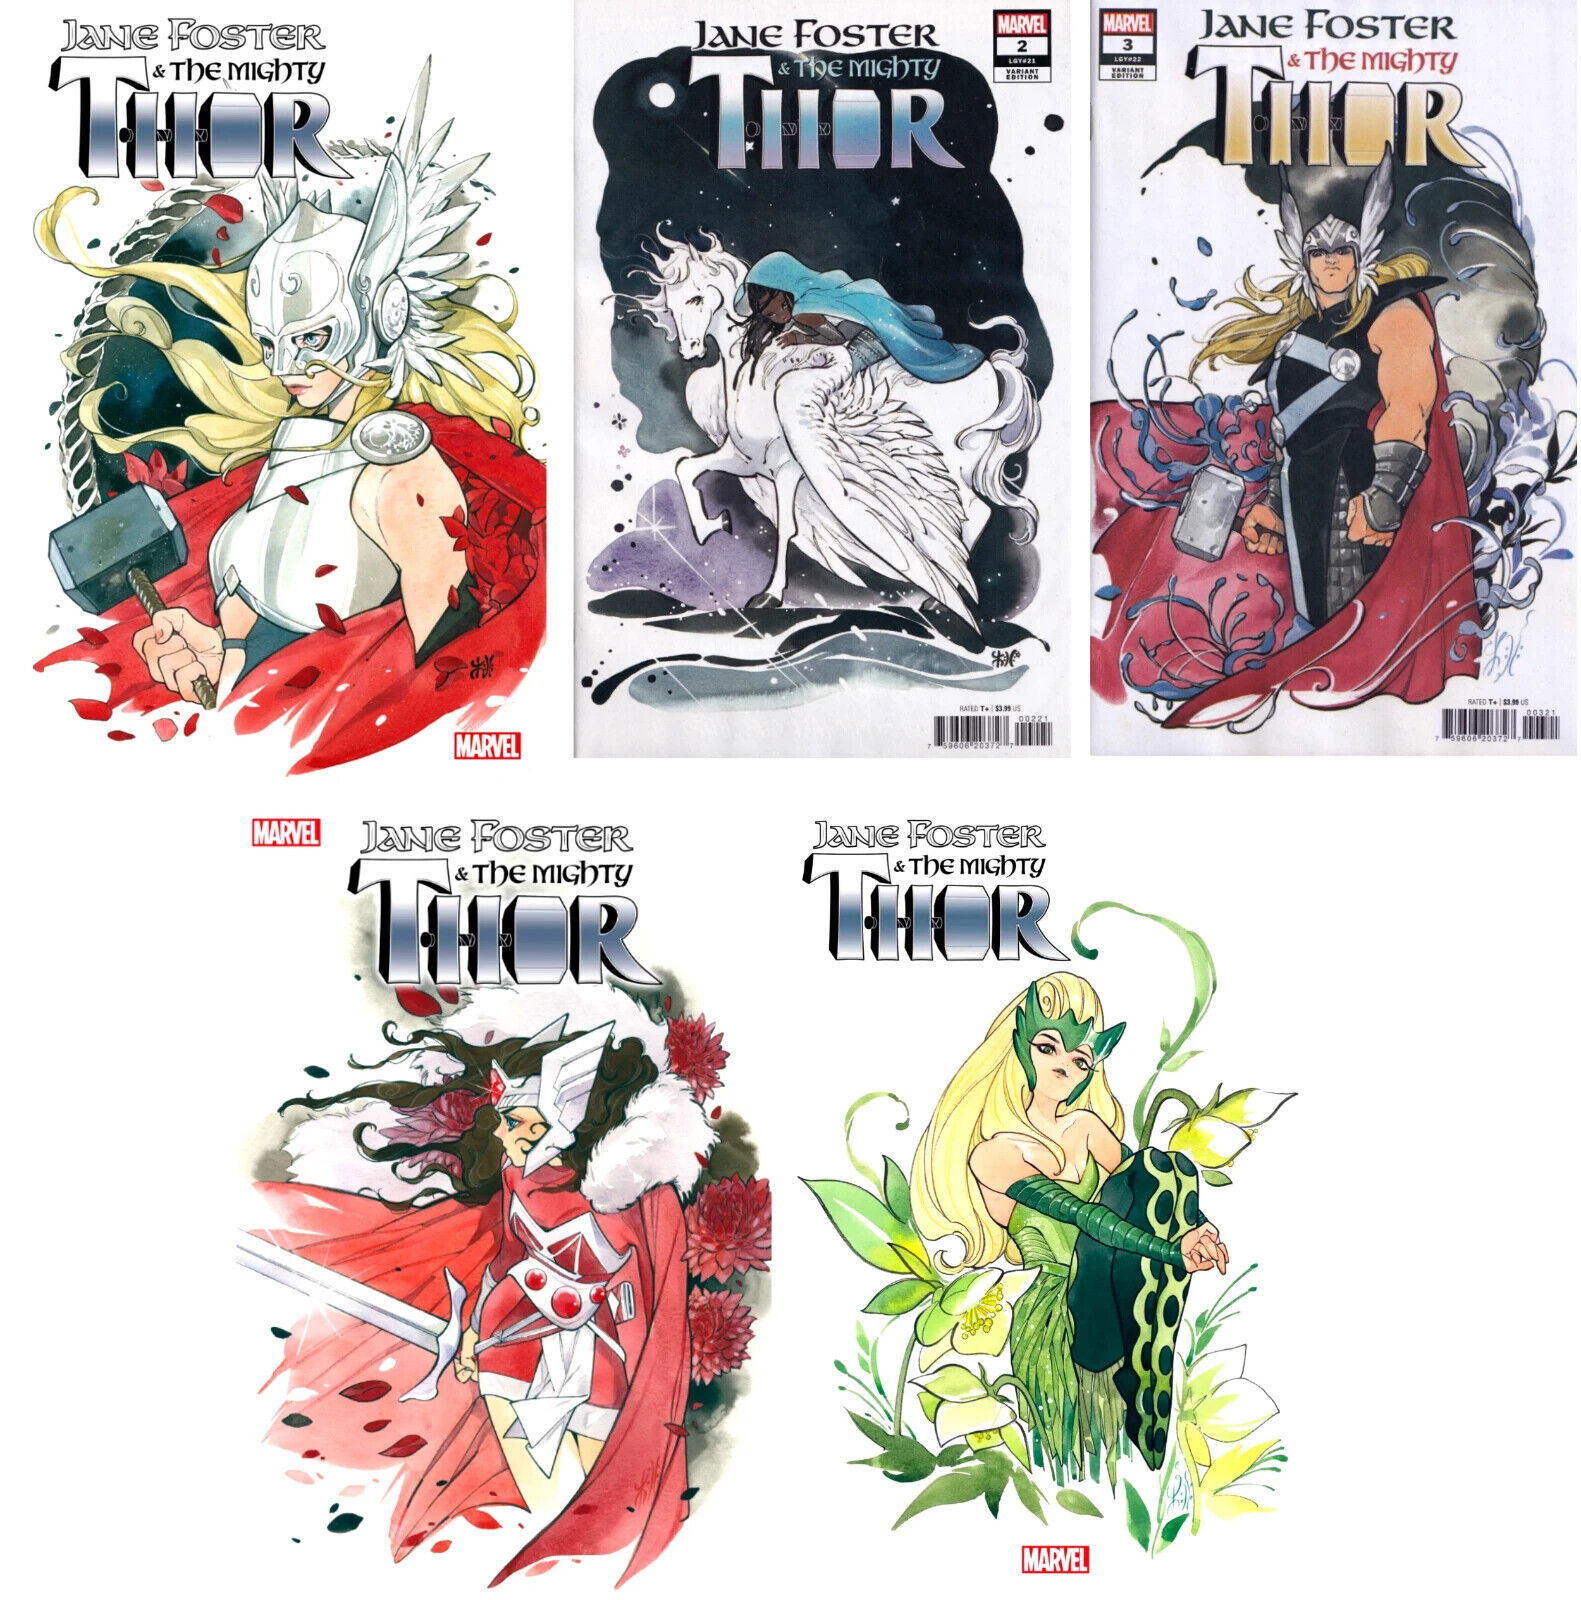 JANE FOSTER & THE MIGHTY THOR #1 #2 #3 #4 #5 (SET OF 5)(PEACH MOMOKO VARIANTS)